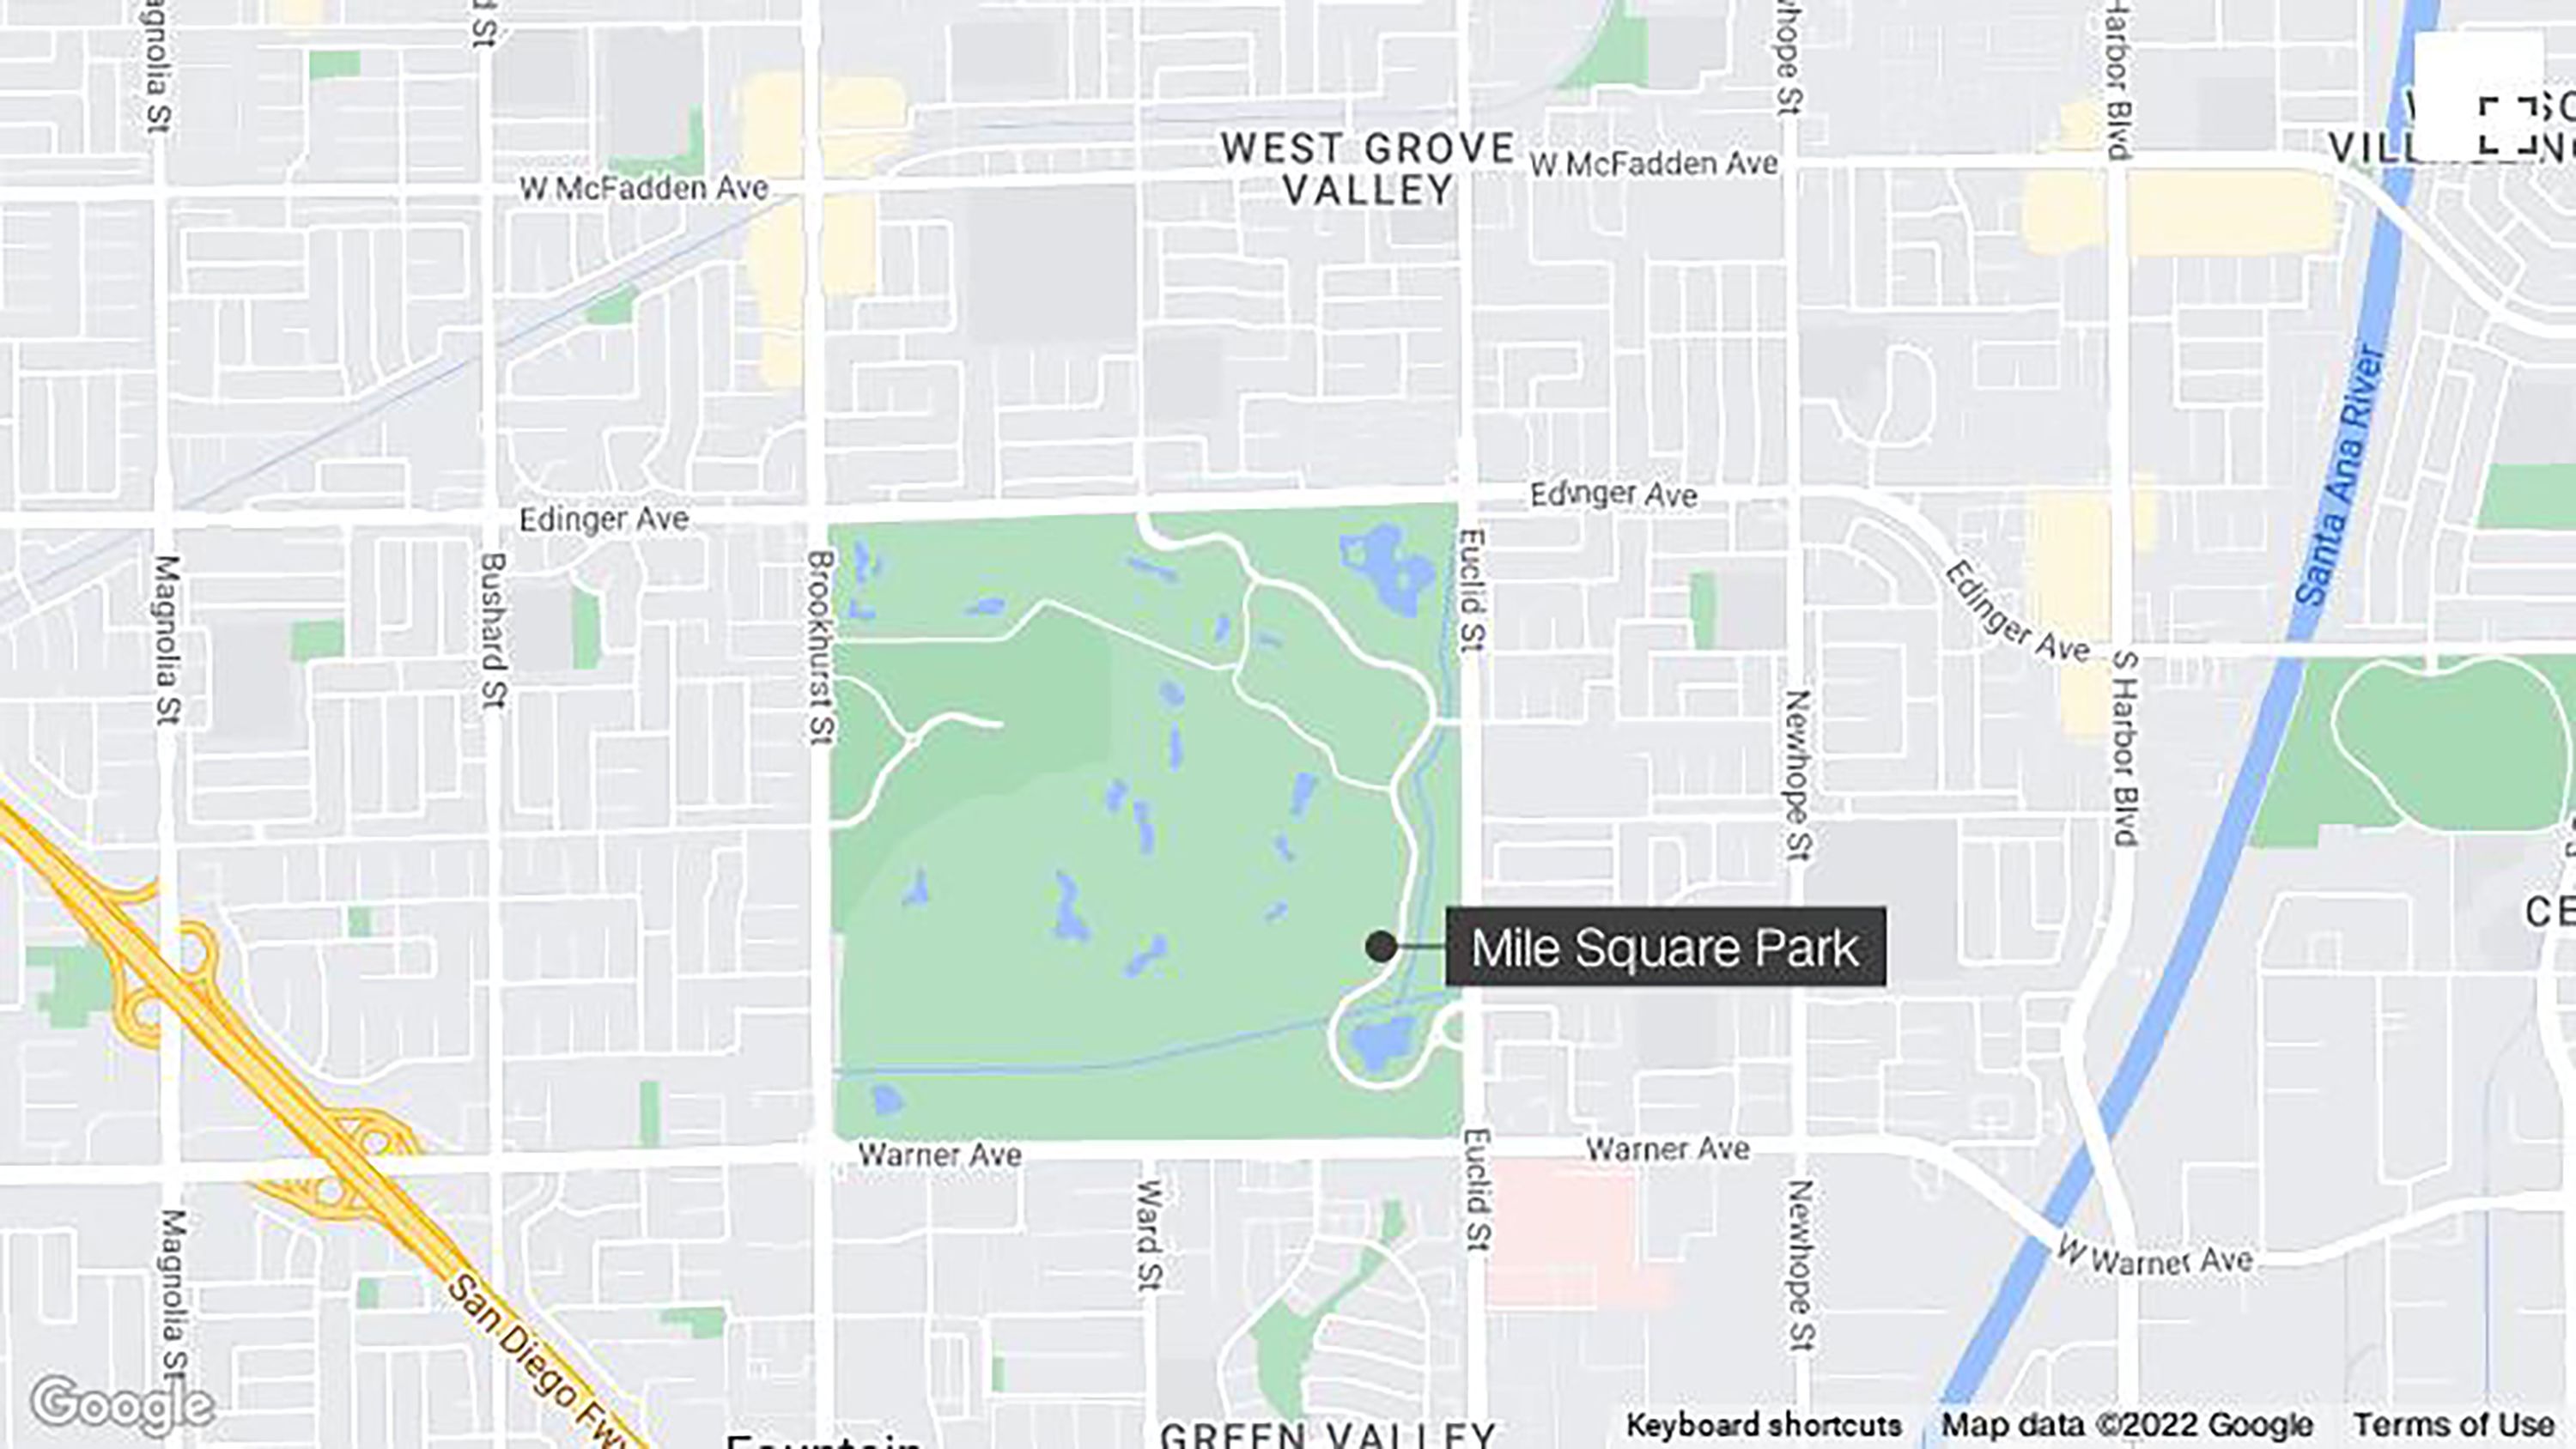 Coyote Bites 6-Year-Old Boy at South San Jose Golf Course – NBC Bay Area